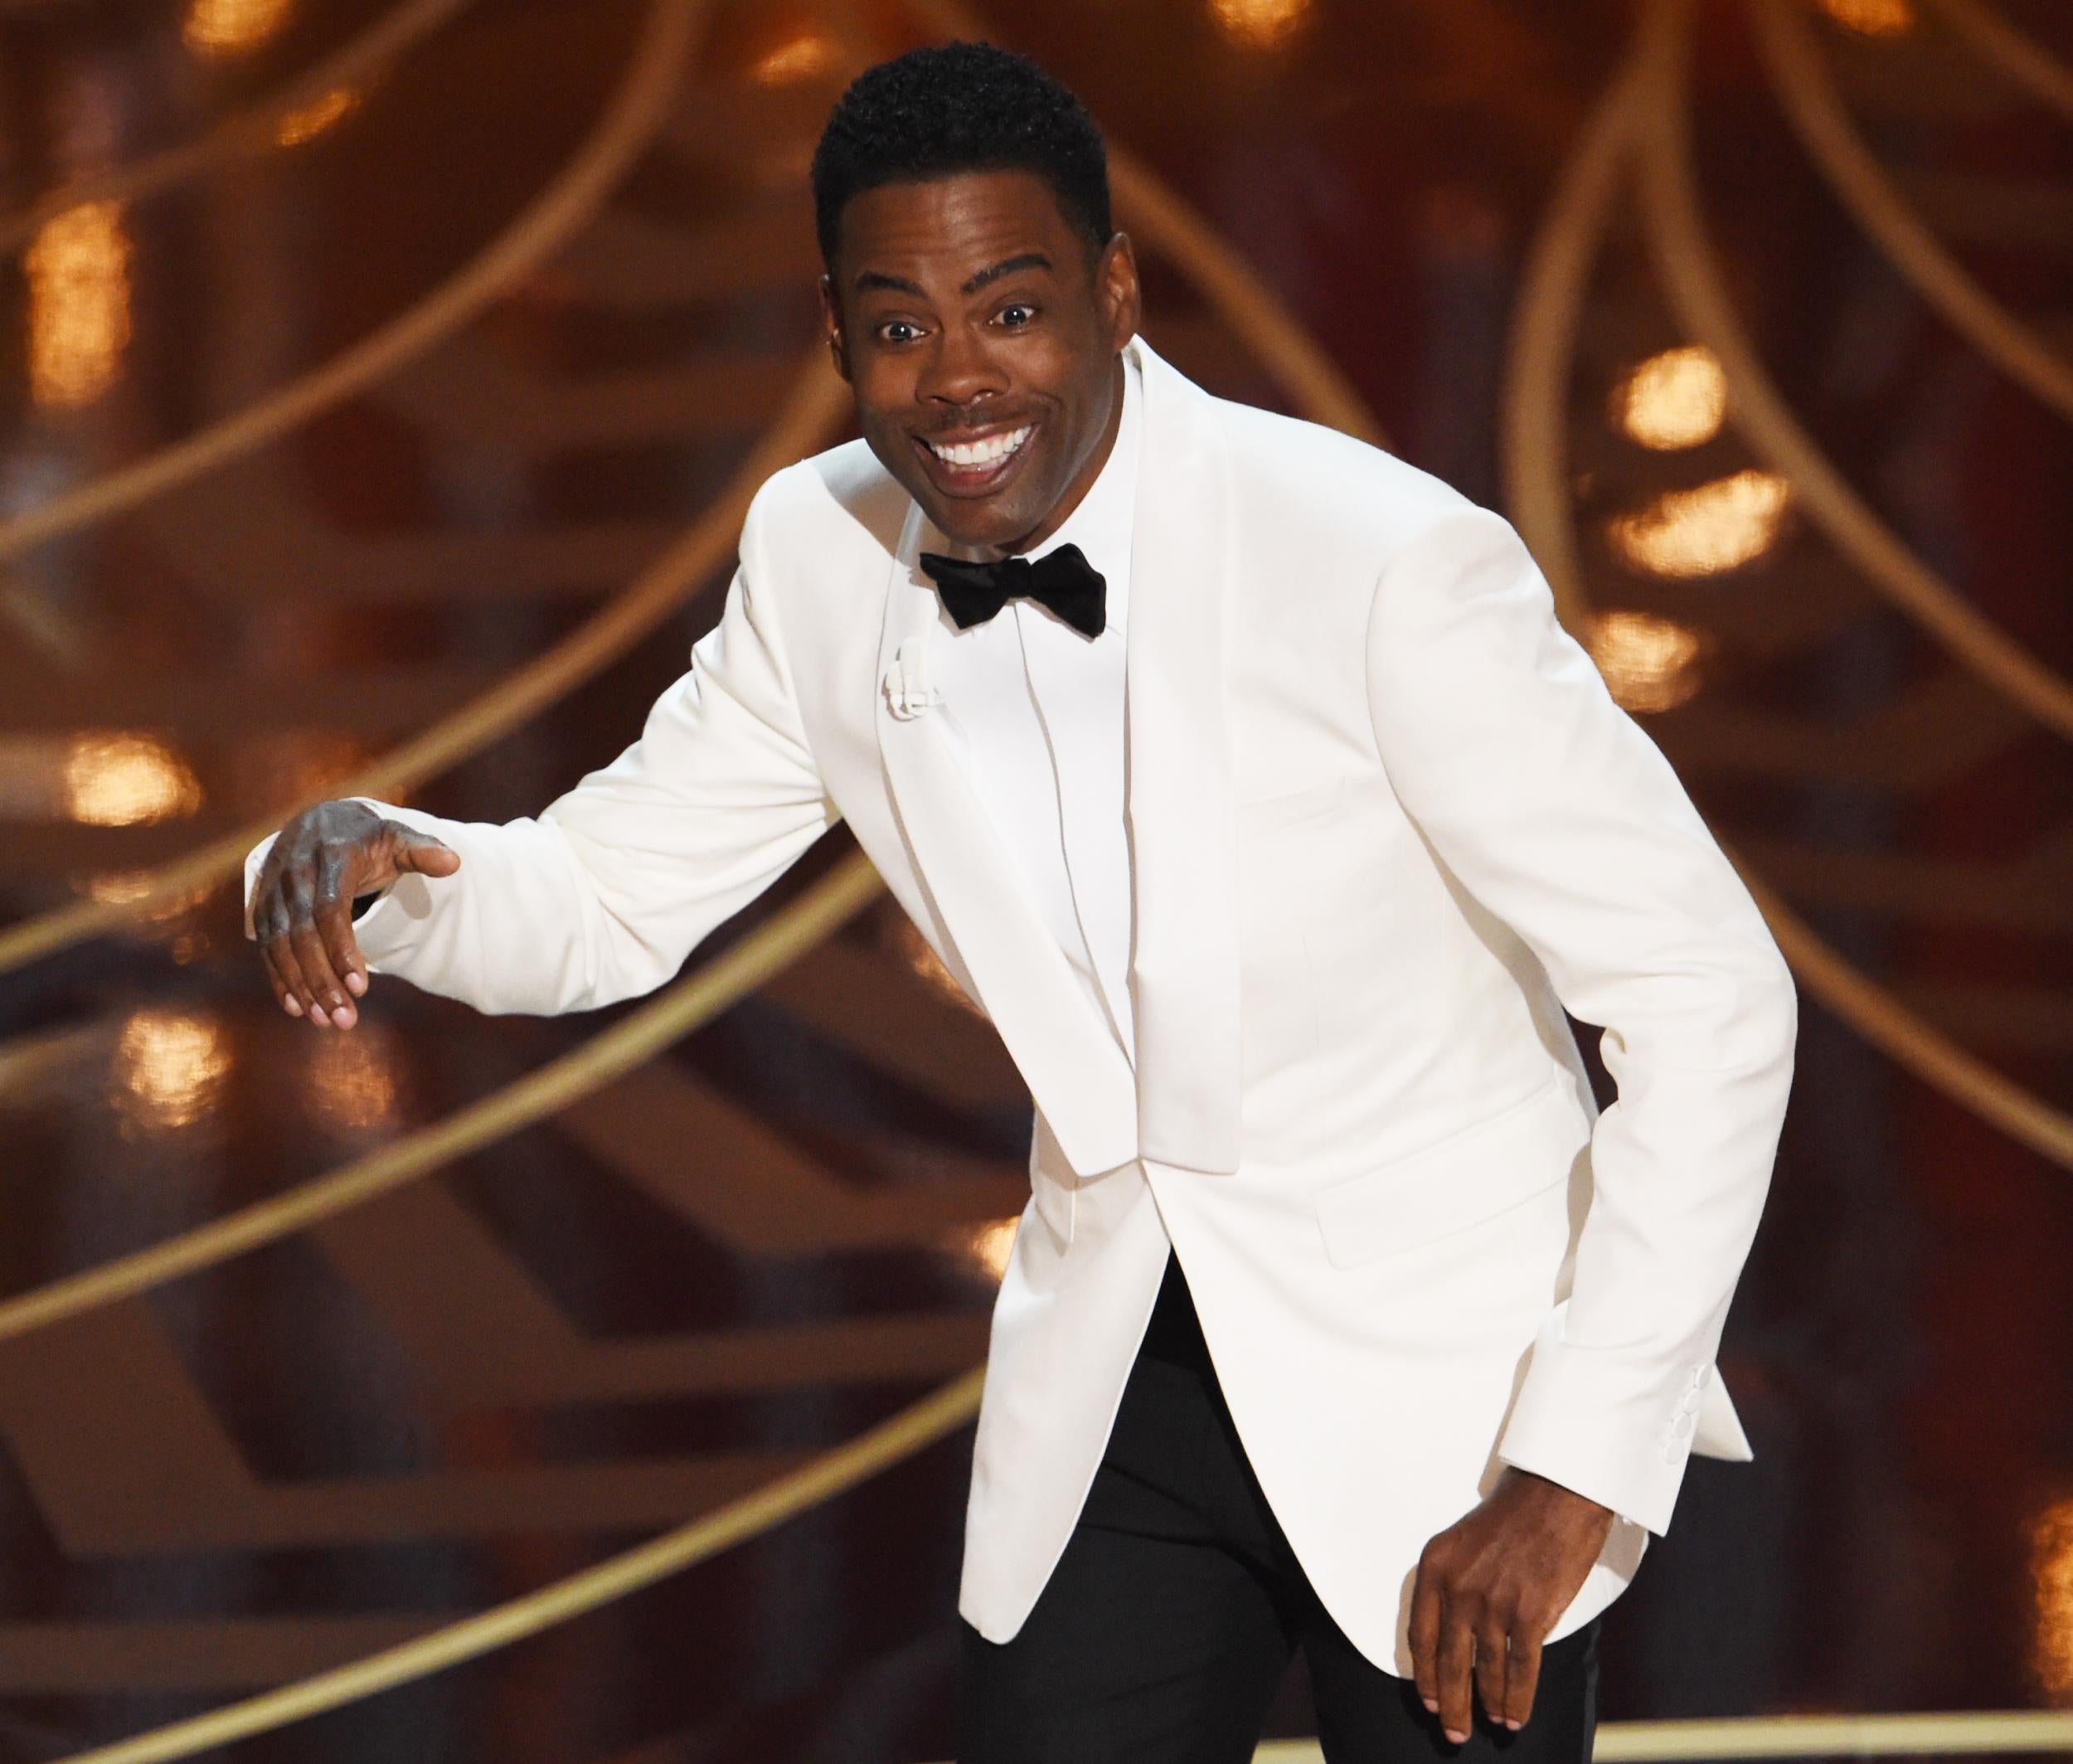 Chris Rock hosting the 88th Academy Award clad in a white tuxedo